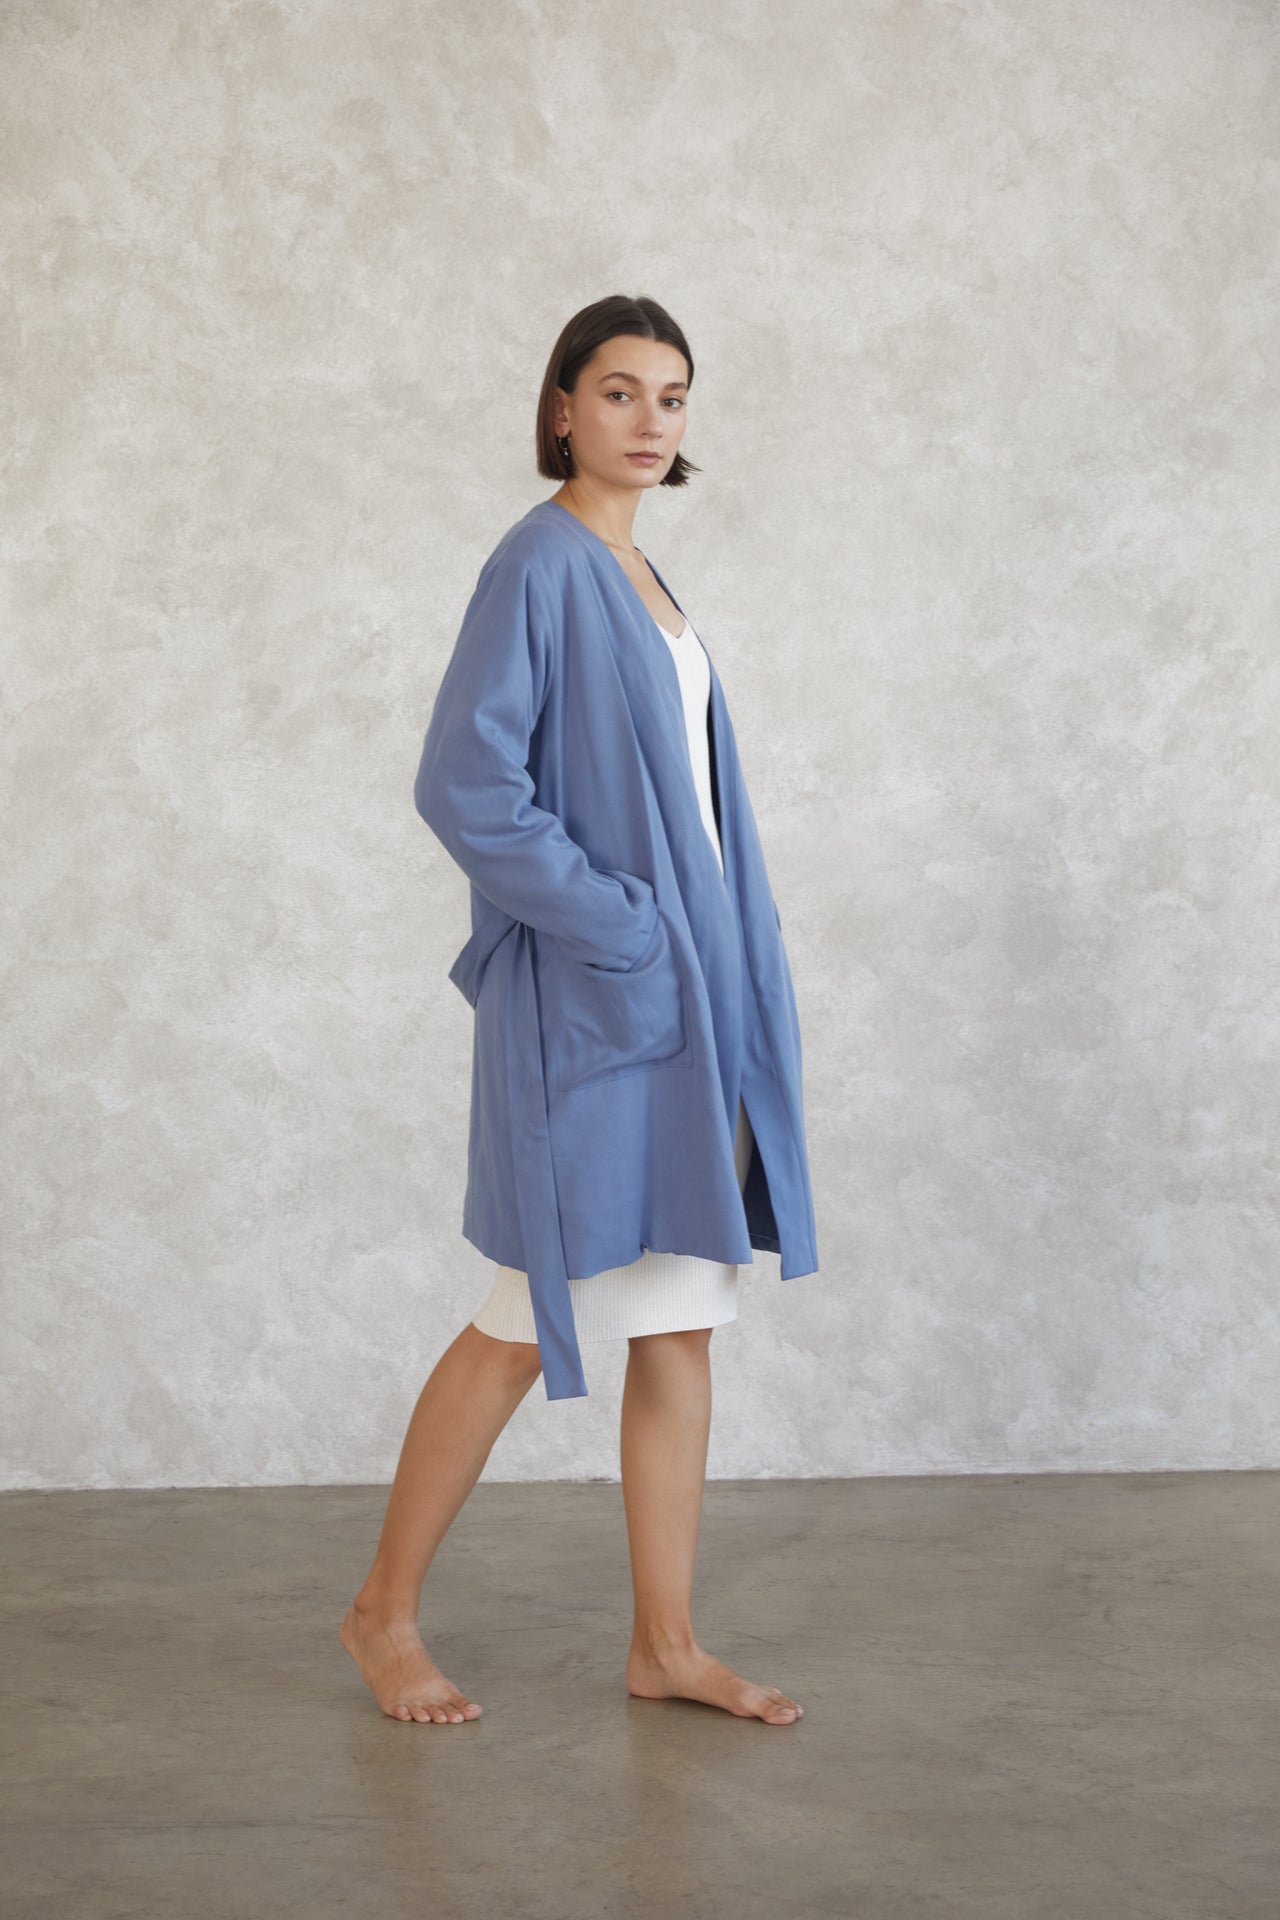 Heated Lounge Robe Exclusively on Uncommon Goods